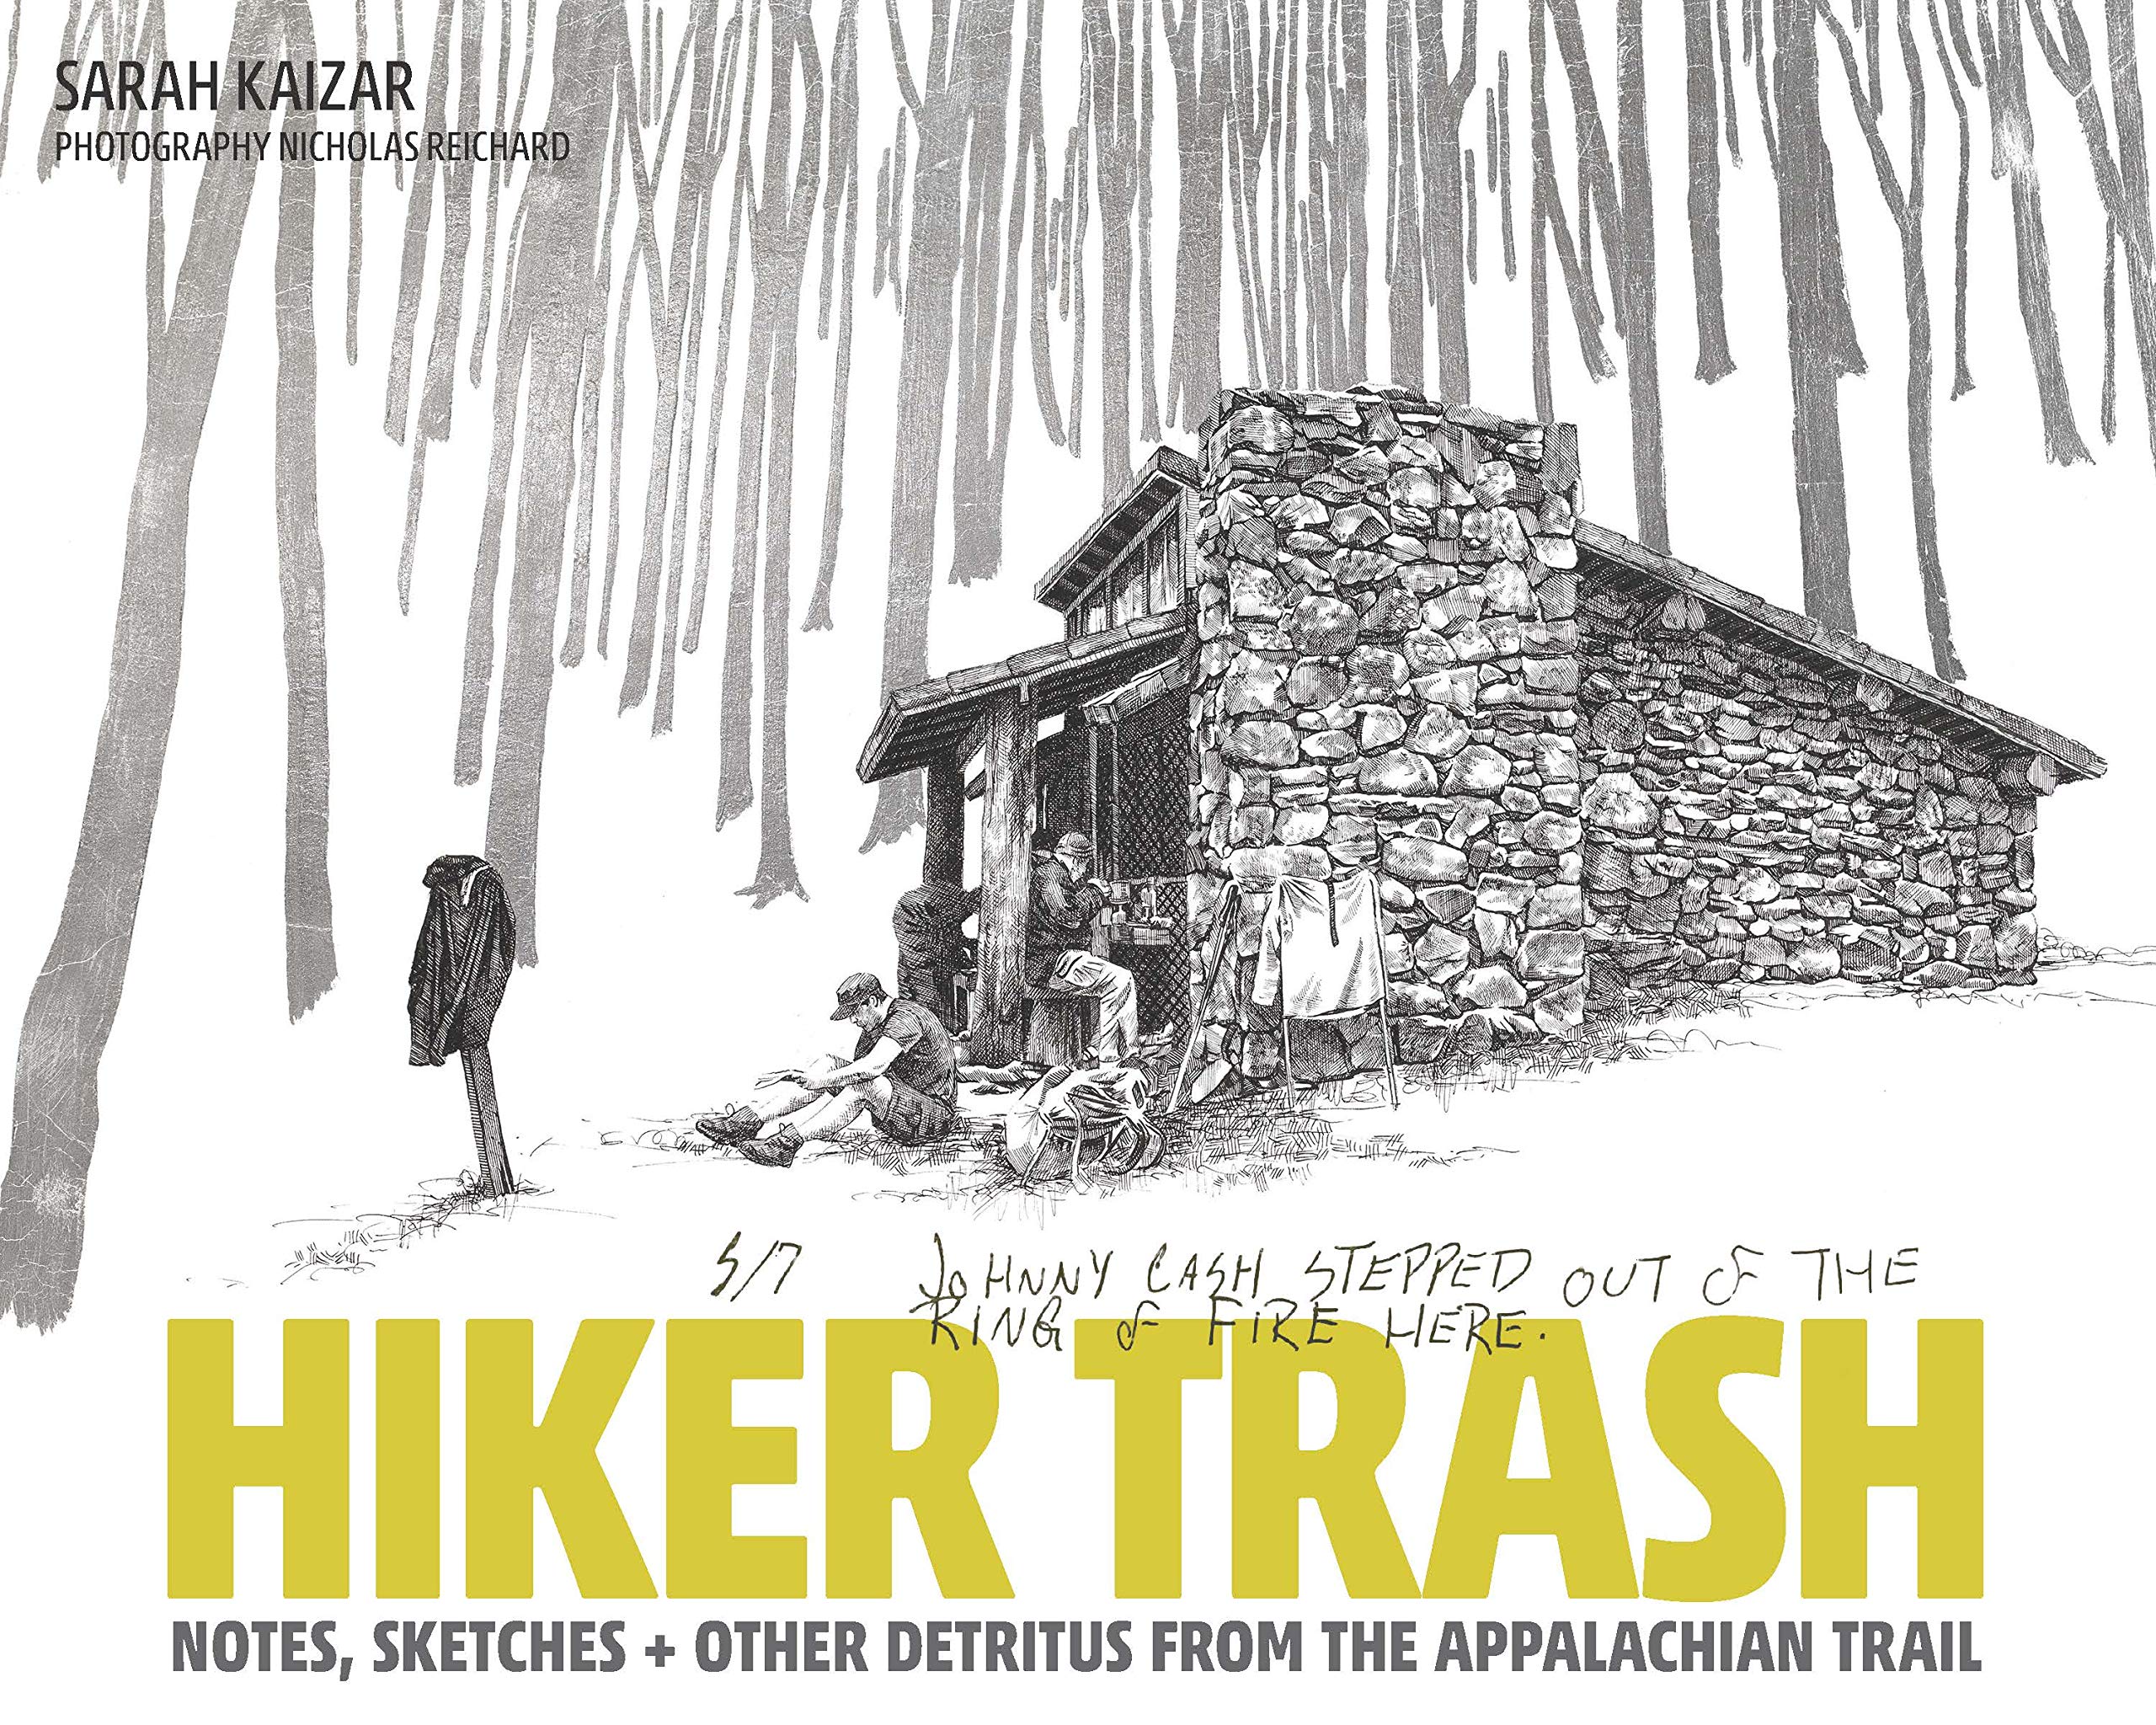 Hiker Trash: Notes, Sketches, and Other Detritus from the Appalachian Trail